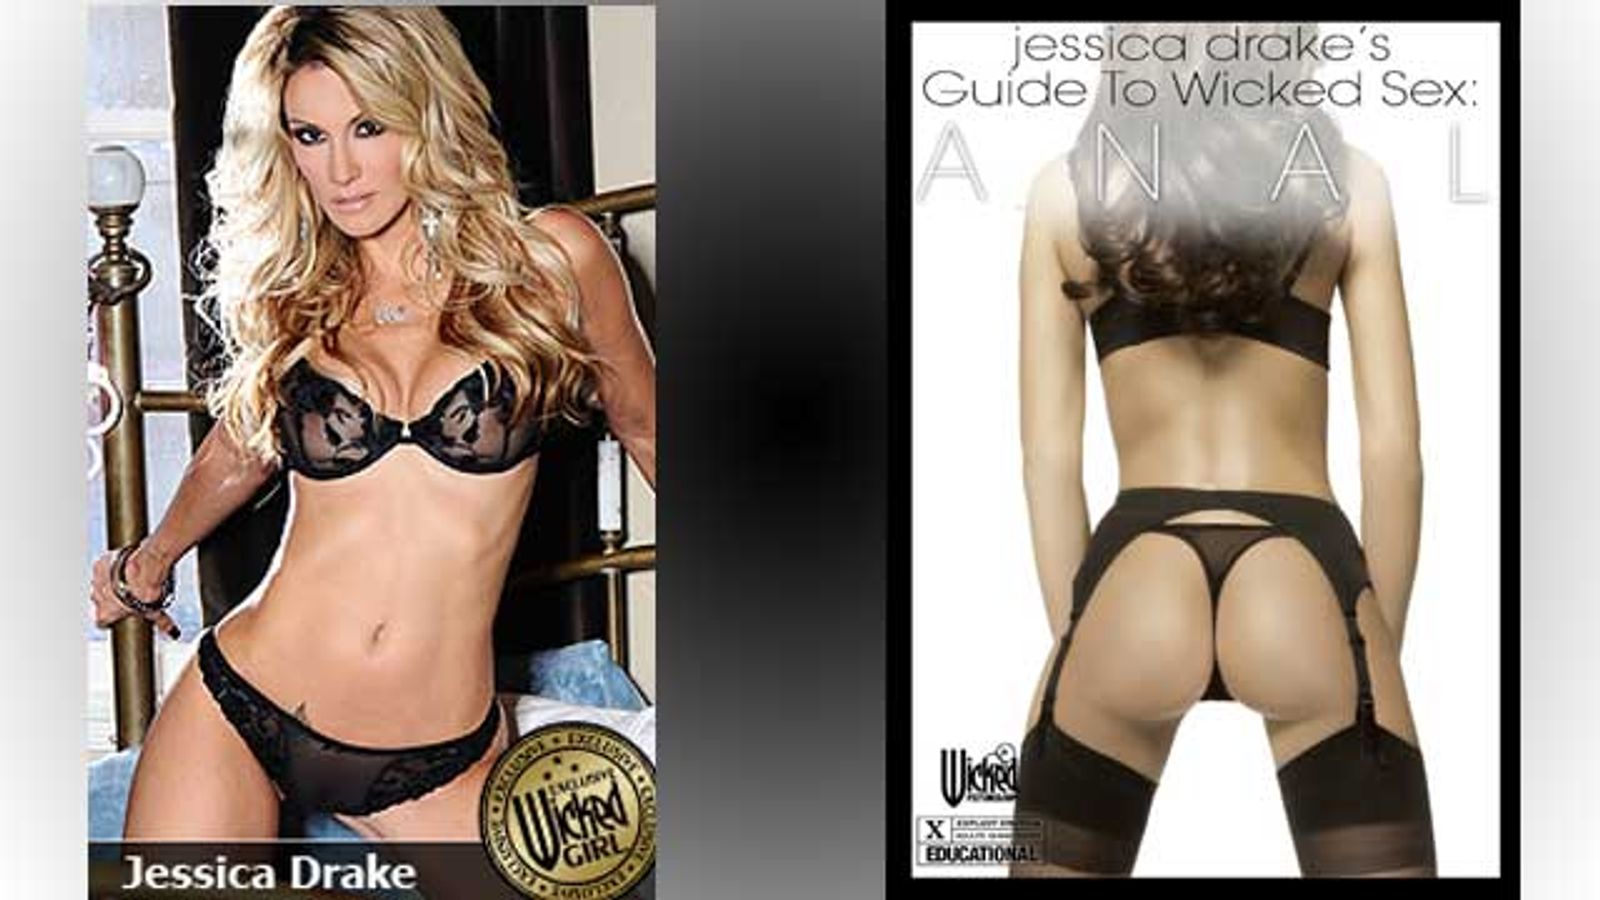 Jessica Drake Debuts 2nd 'Guide to Wicked Sex: Anal'